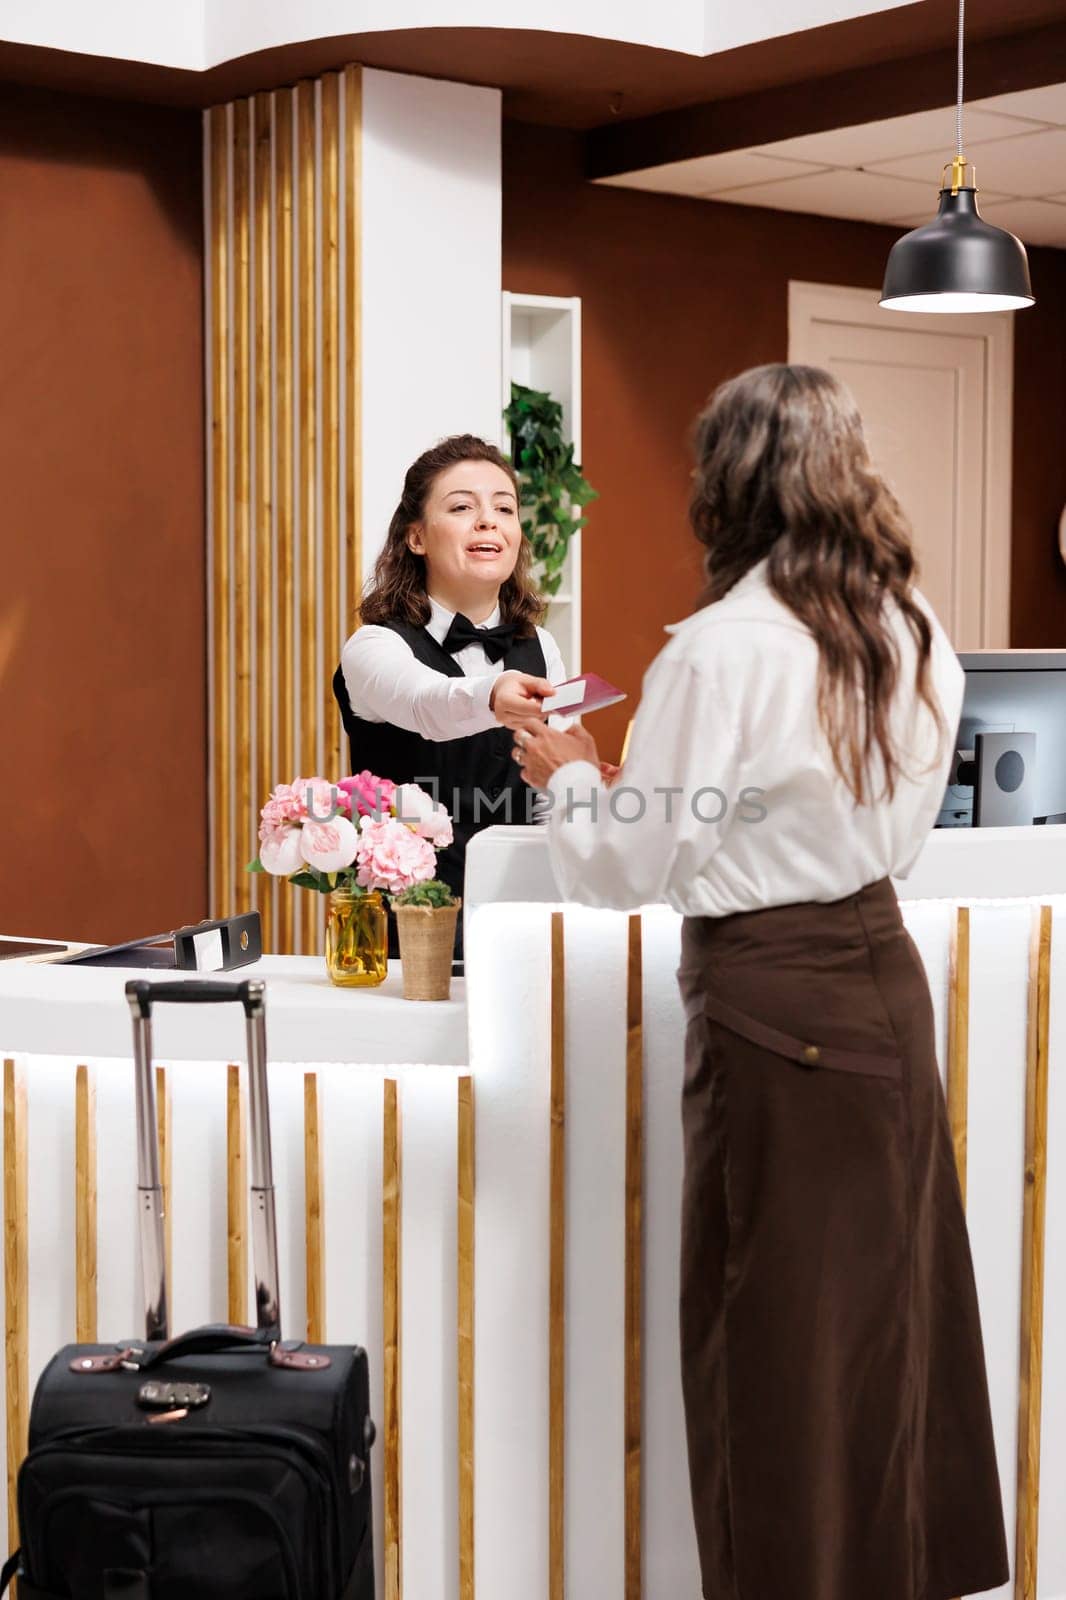 Elderly female tourist checks in with her passport at hotel lobby desk. After confirming identity, friendly concierge at registration counter returns the personal documents of retired senior woman.